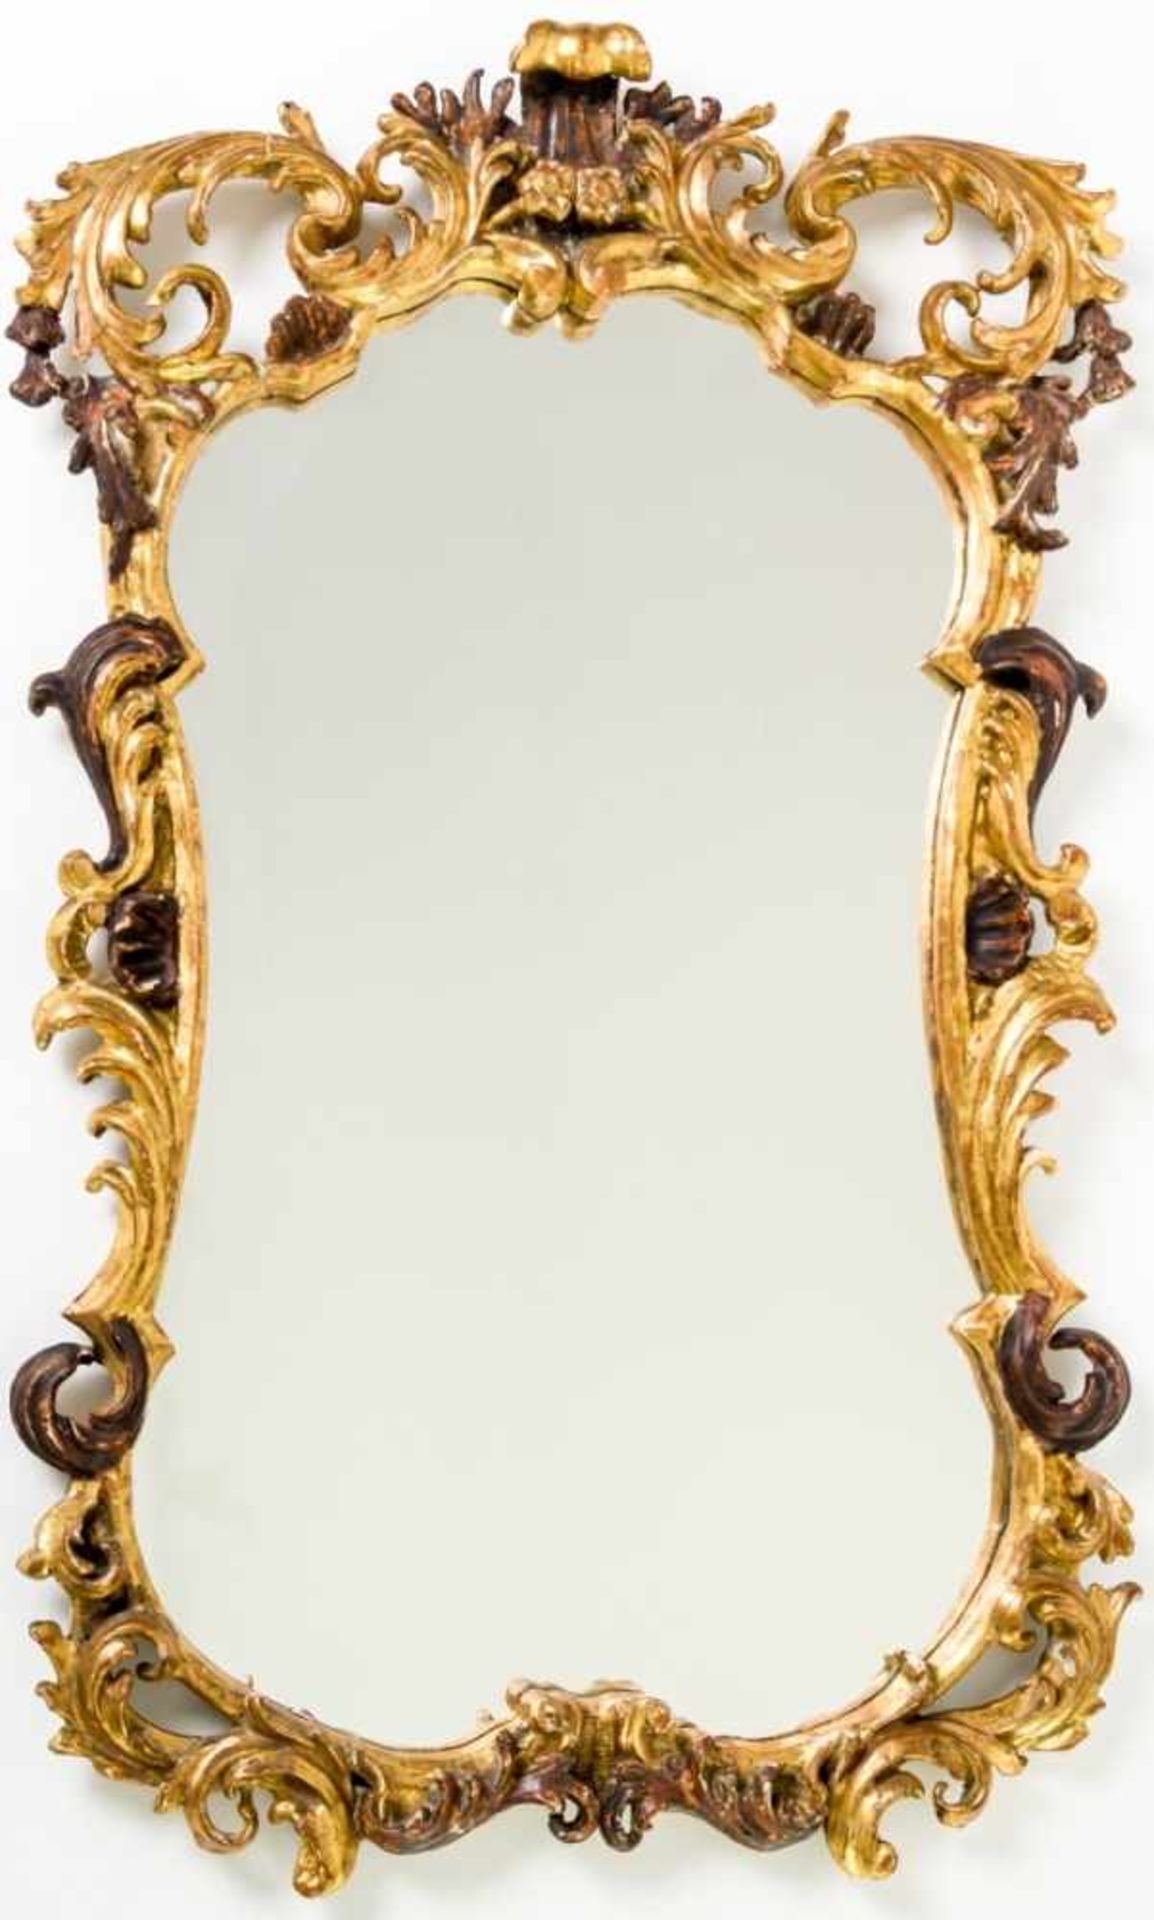 Very nice rococo style mirror, South Germany, wood carved and gilded, around 1900 orearlier, 89 x 56